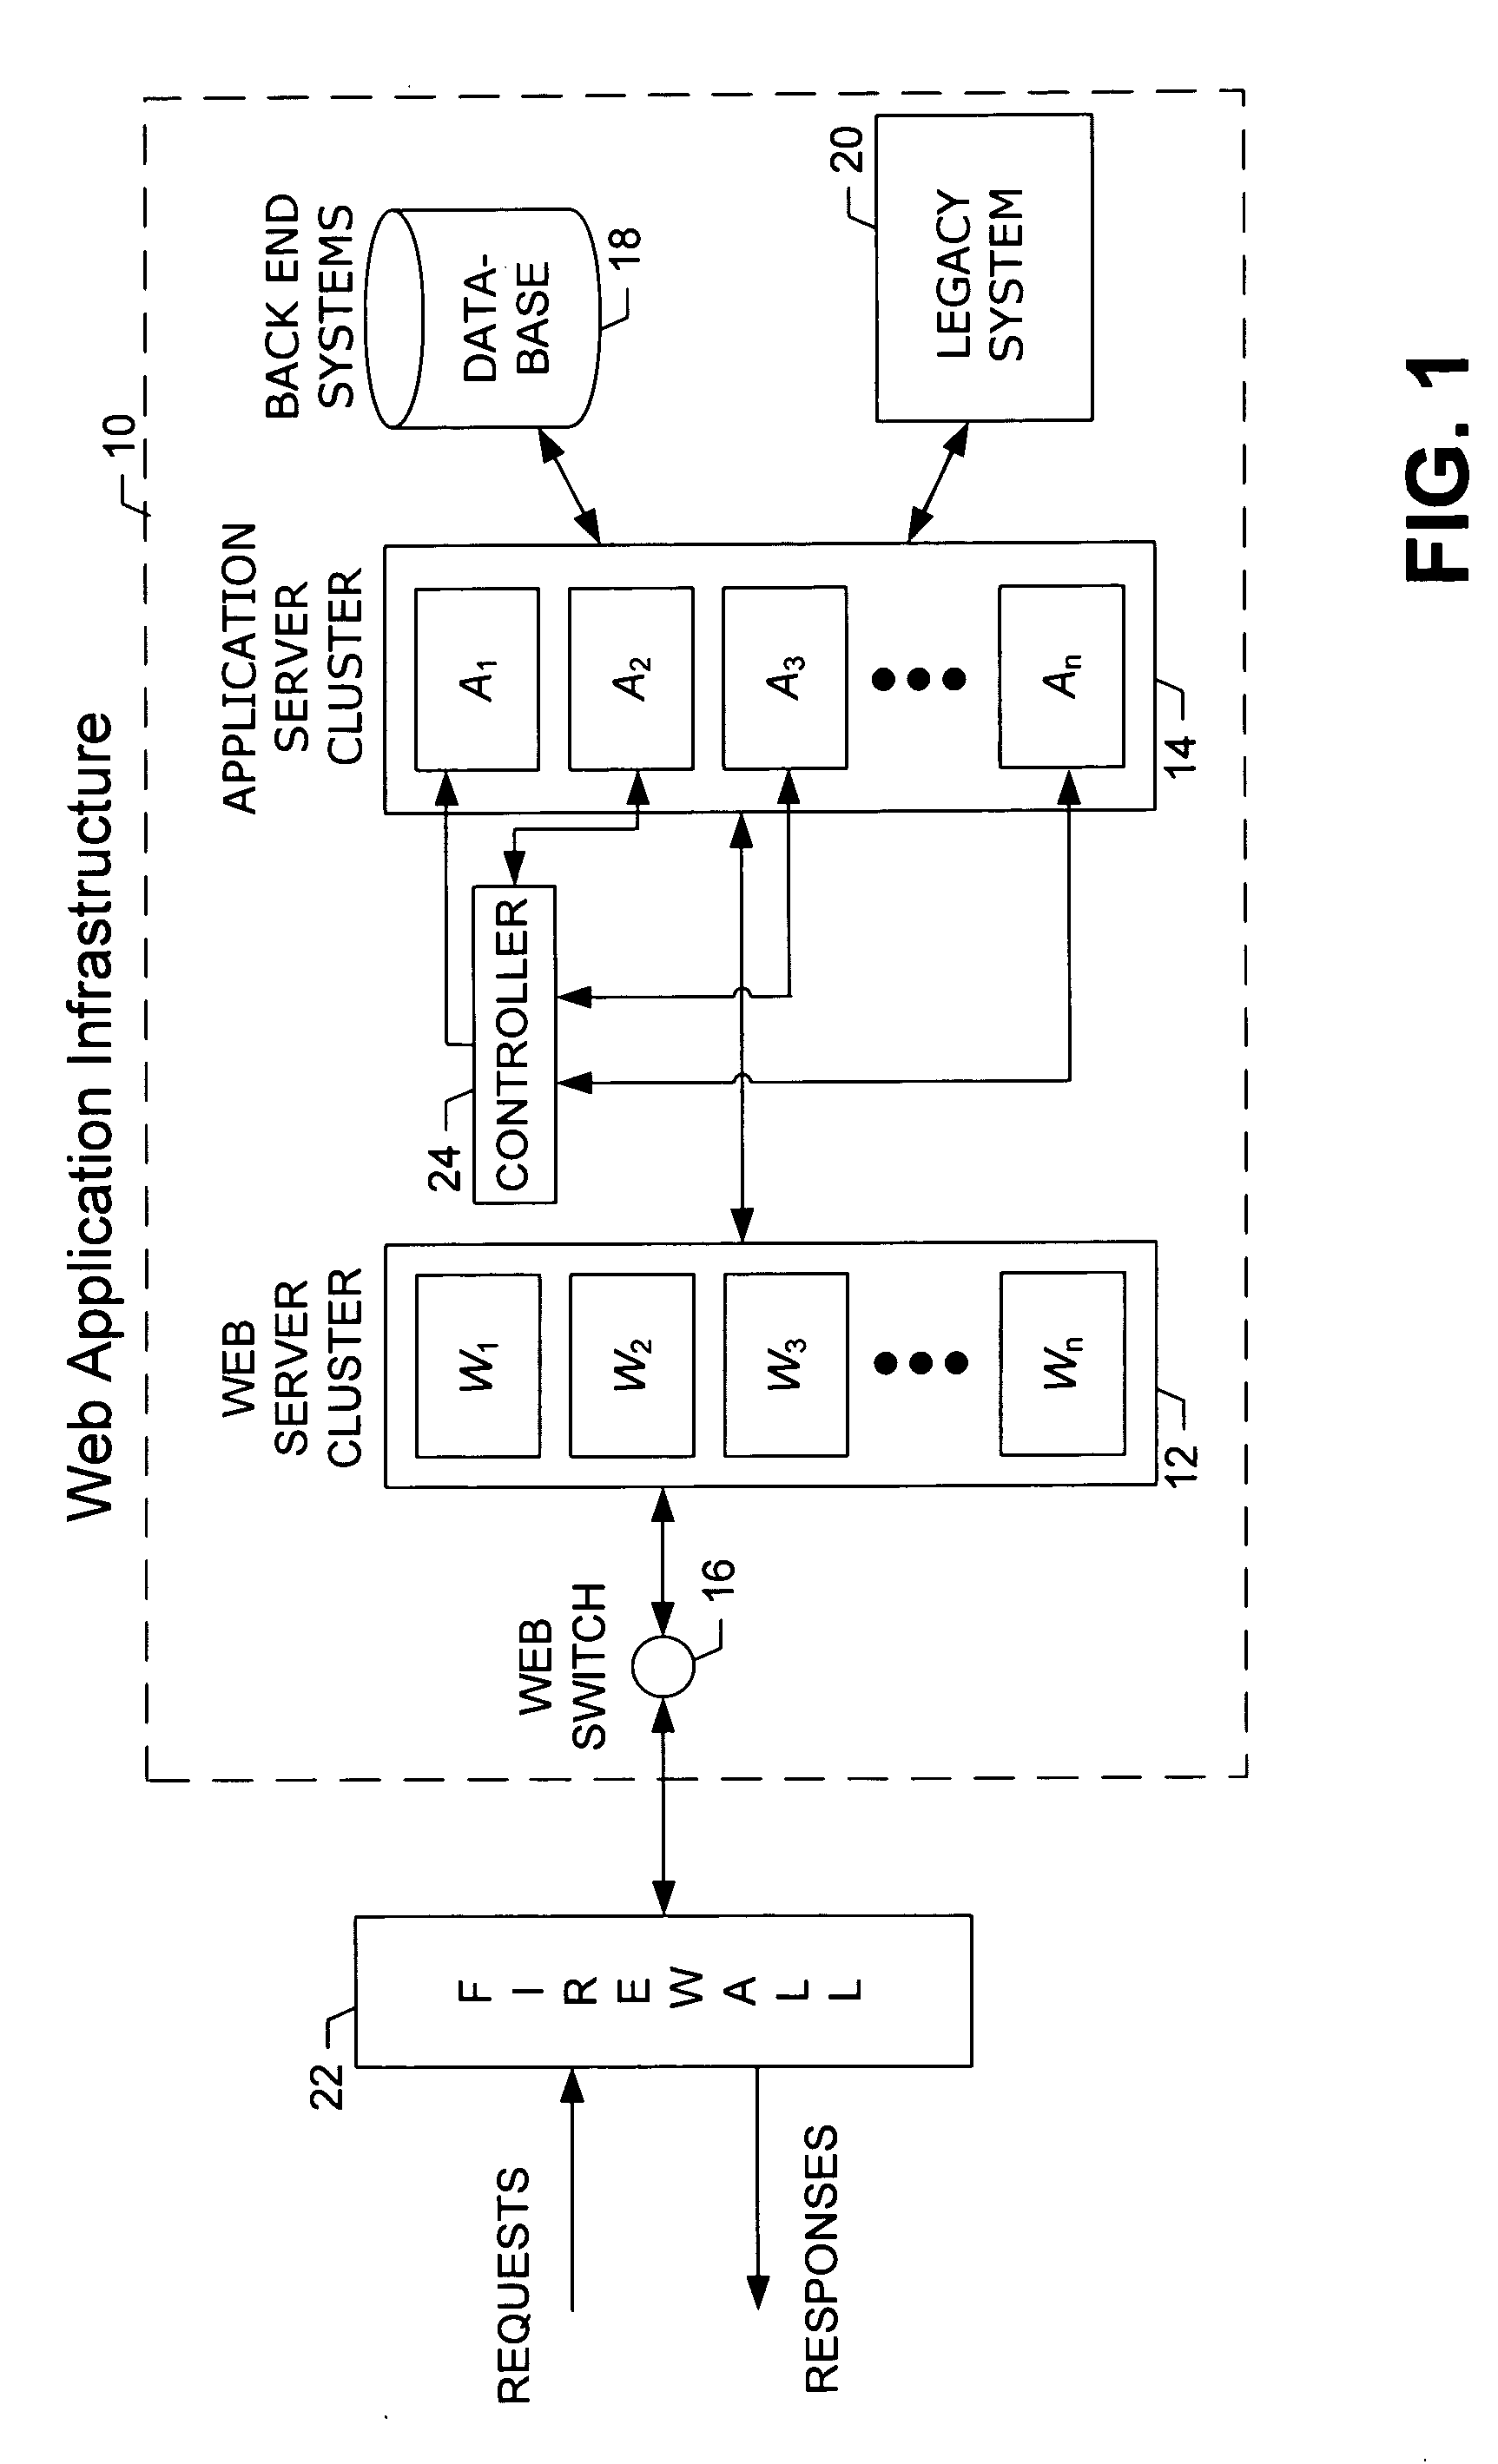 Apparatus and method for distributing requests across a cluster of application servers